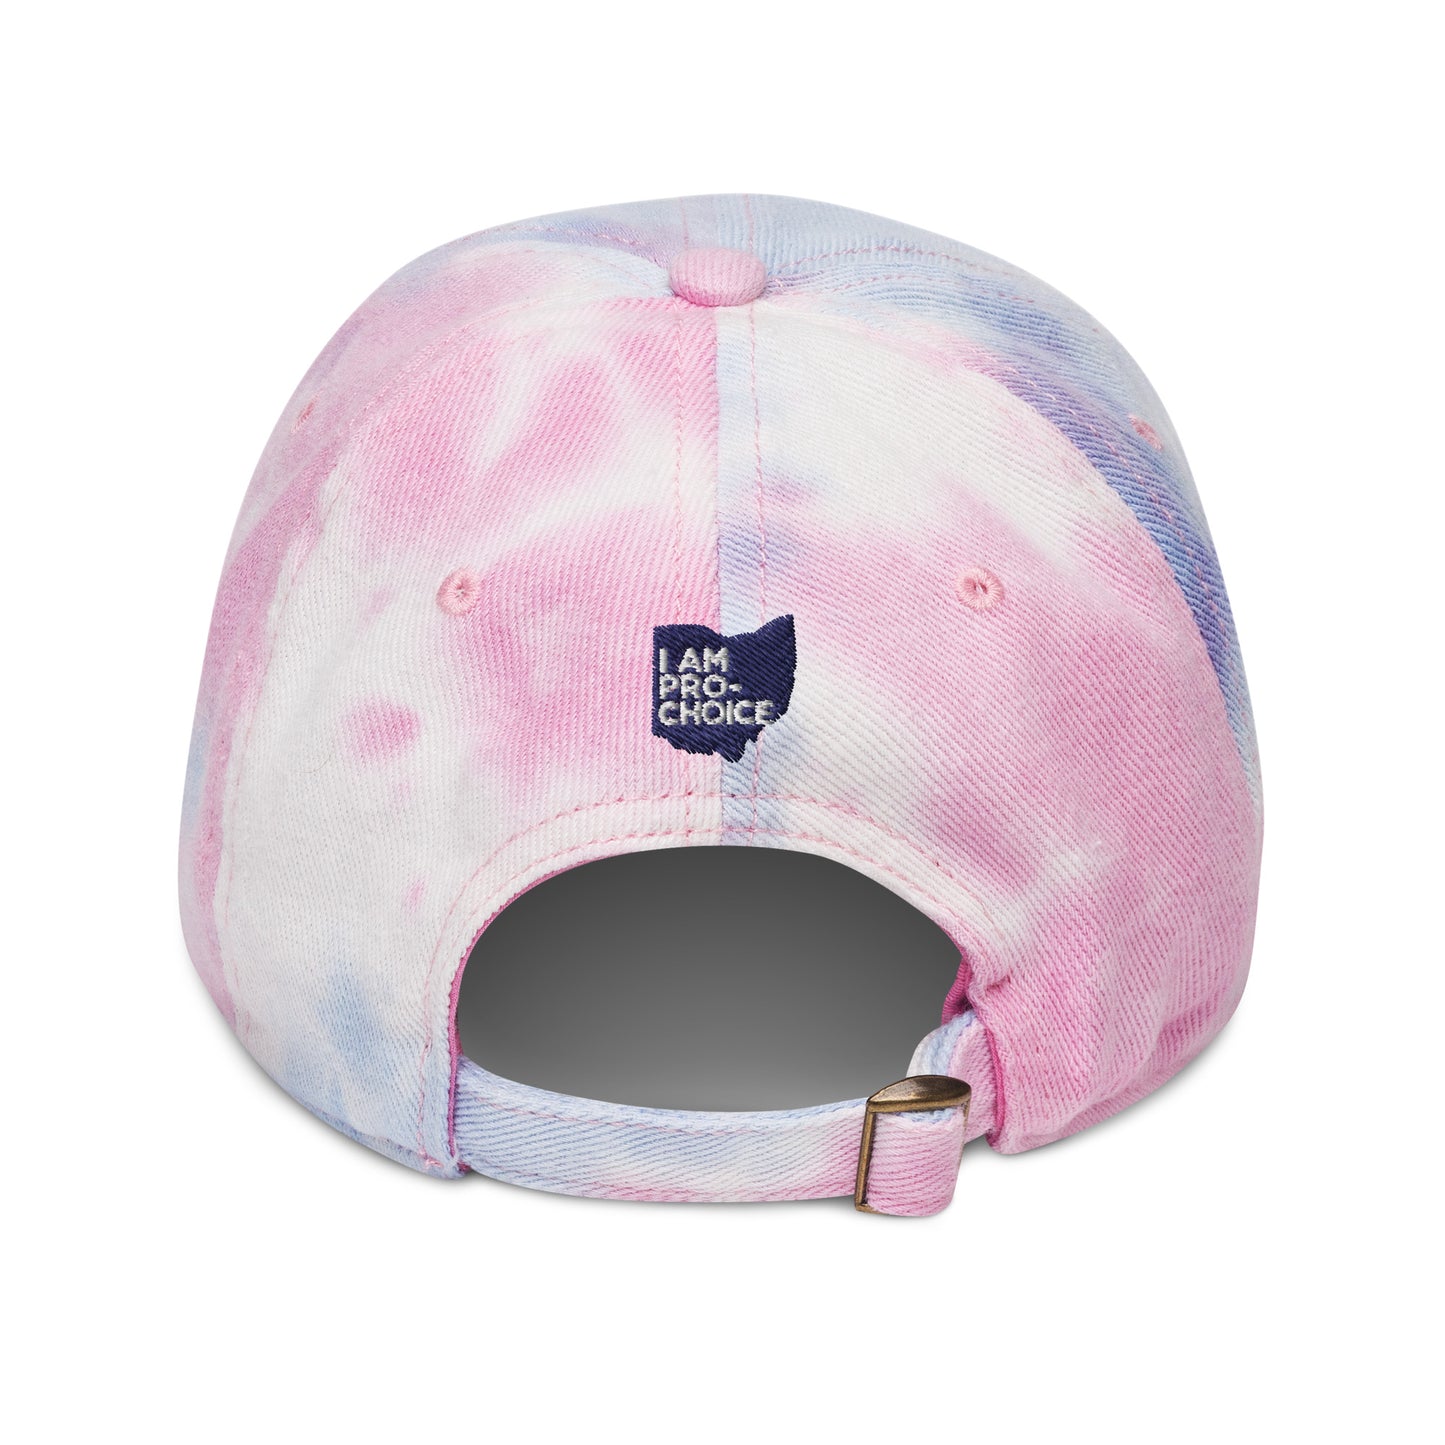 Abortion Forever Tie dye hat